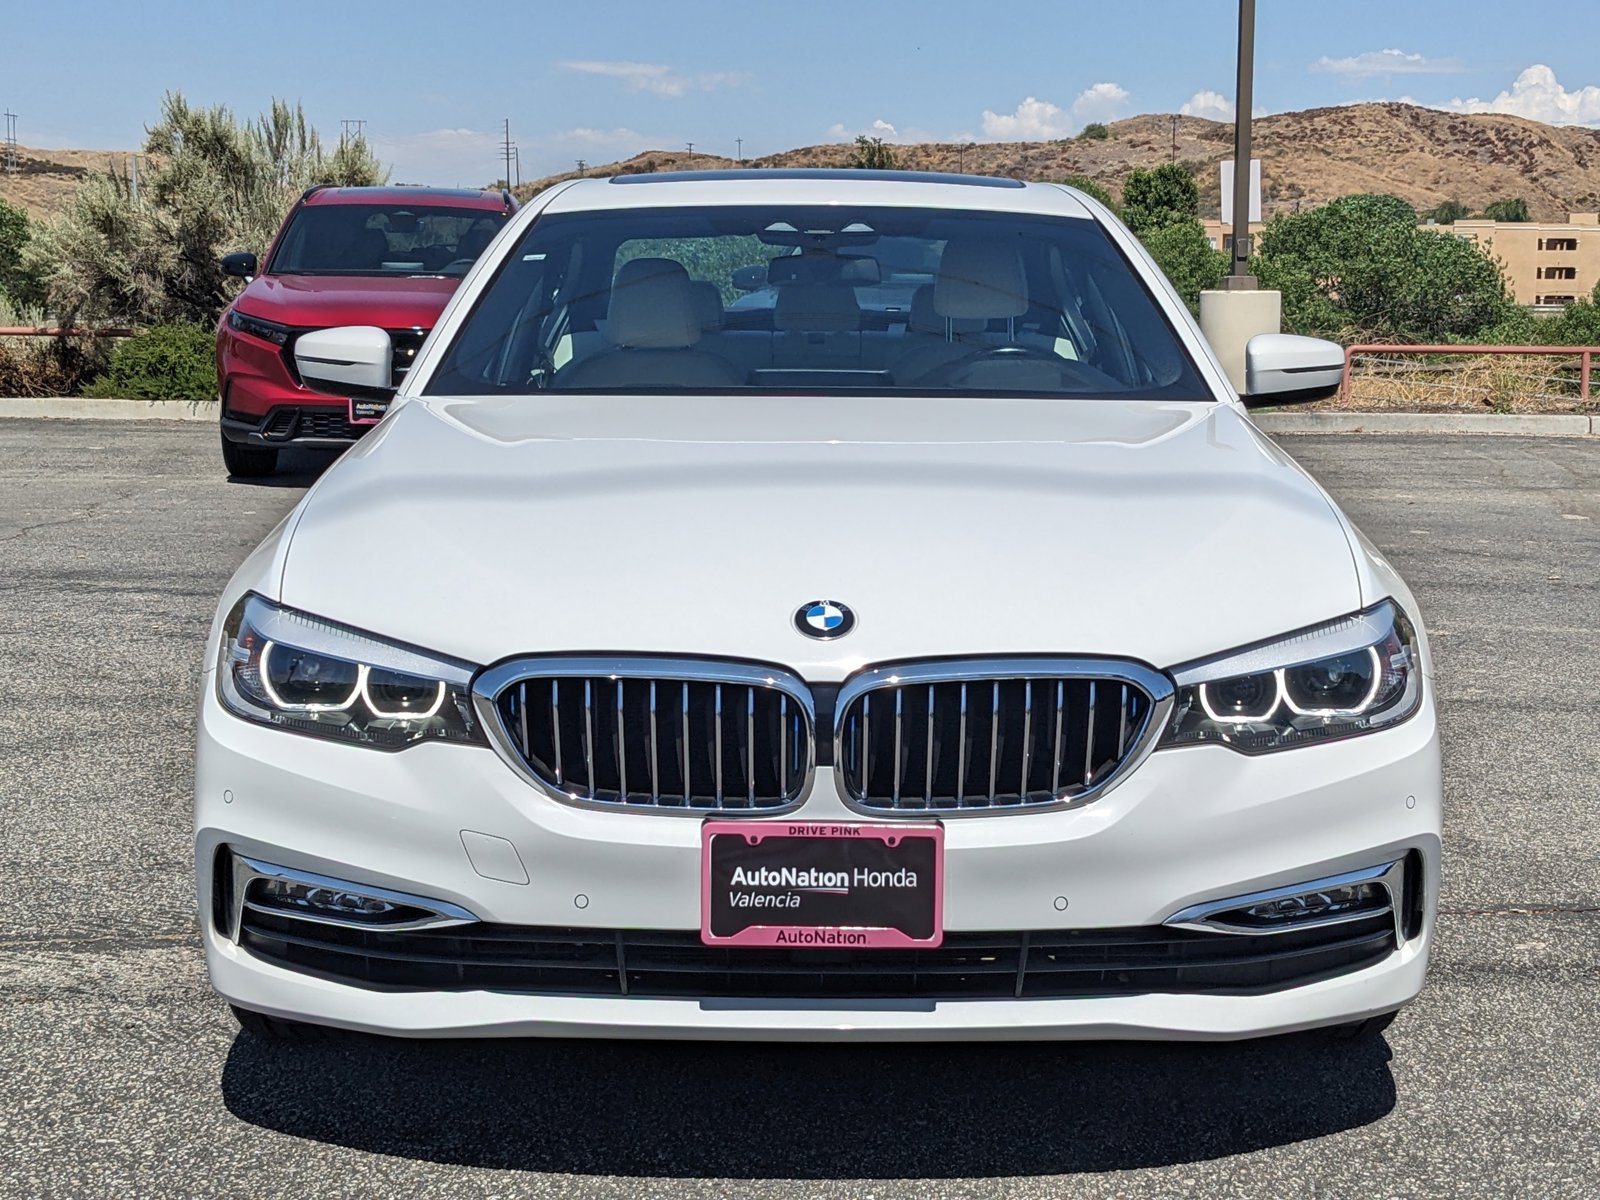 Used 2018 BMW 5 Series 530e with VIN WBAJA9C51JB249200 for sale in Valencia, CA